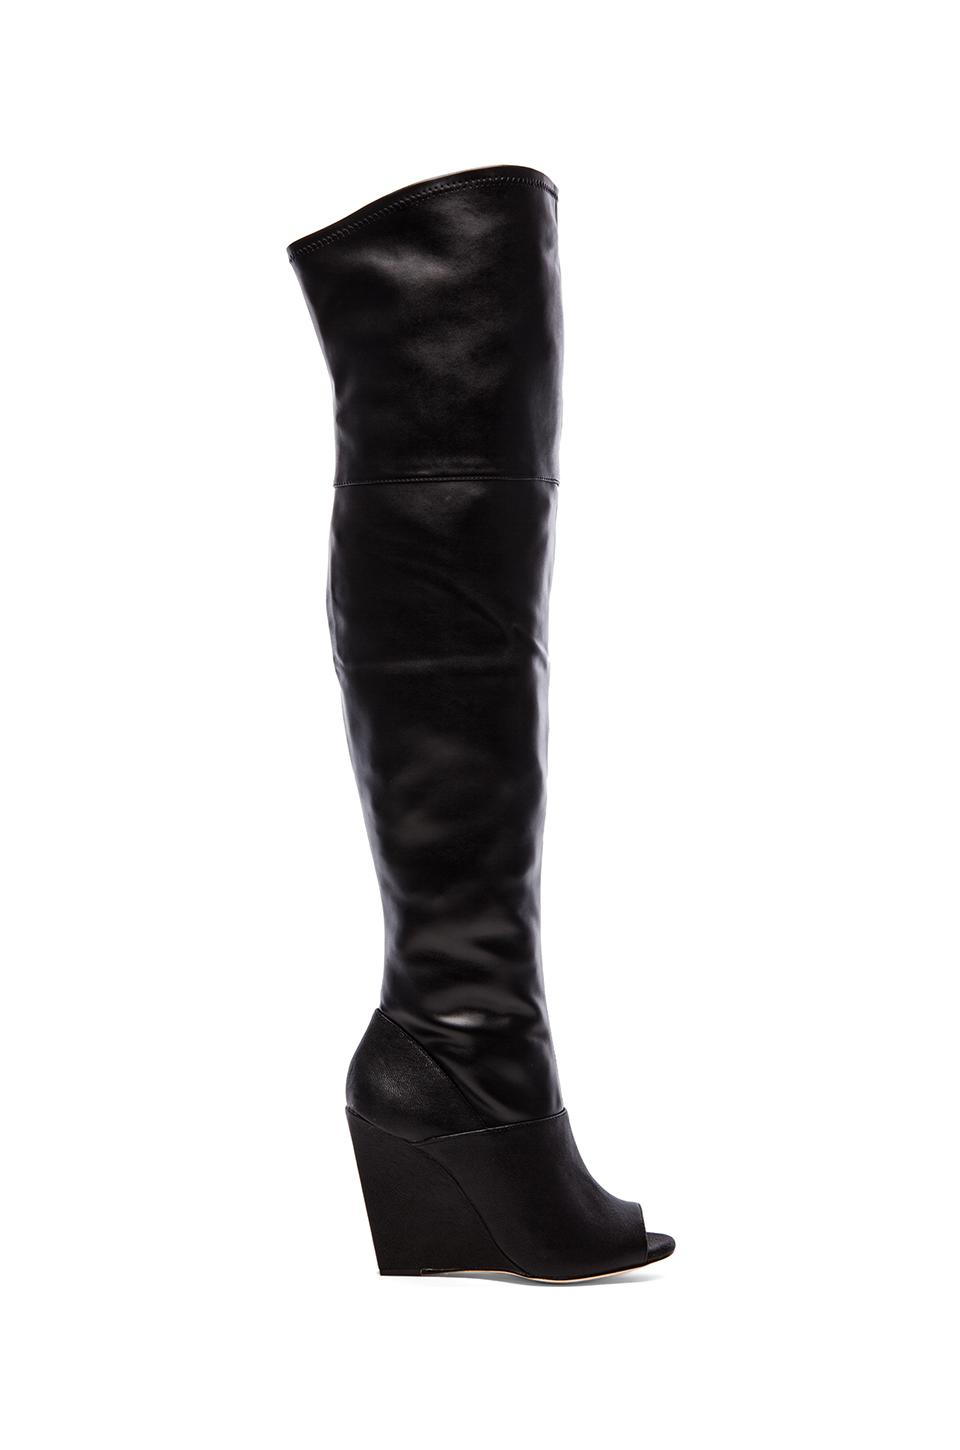 Bcbgmaxazria Gian Open Toe Over The Knee Boots in Black | Lyst